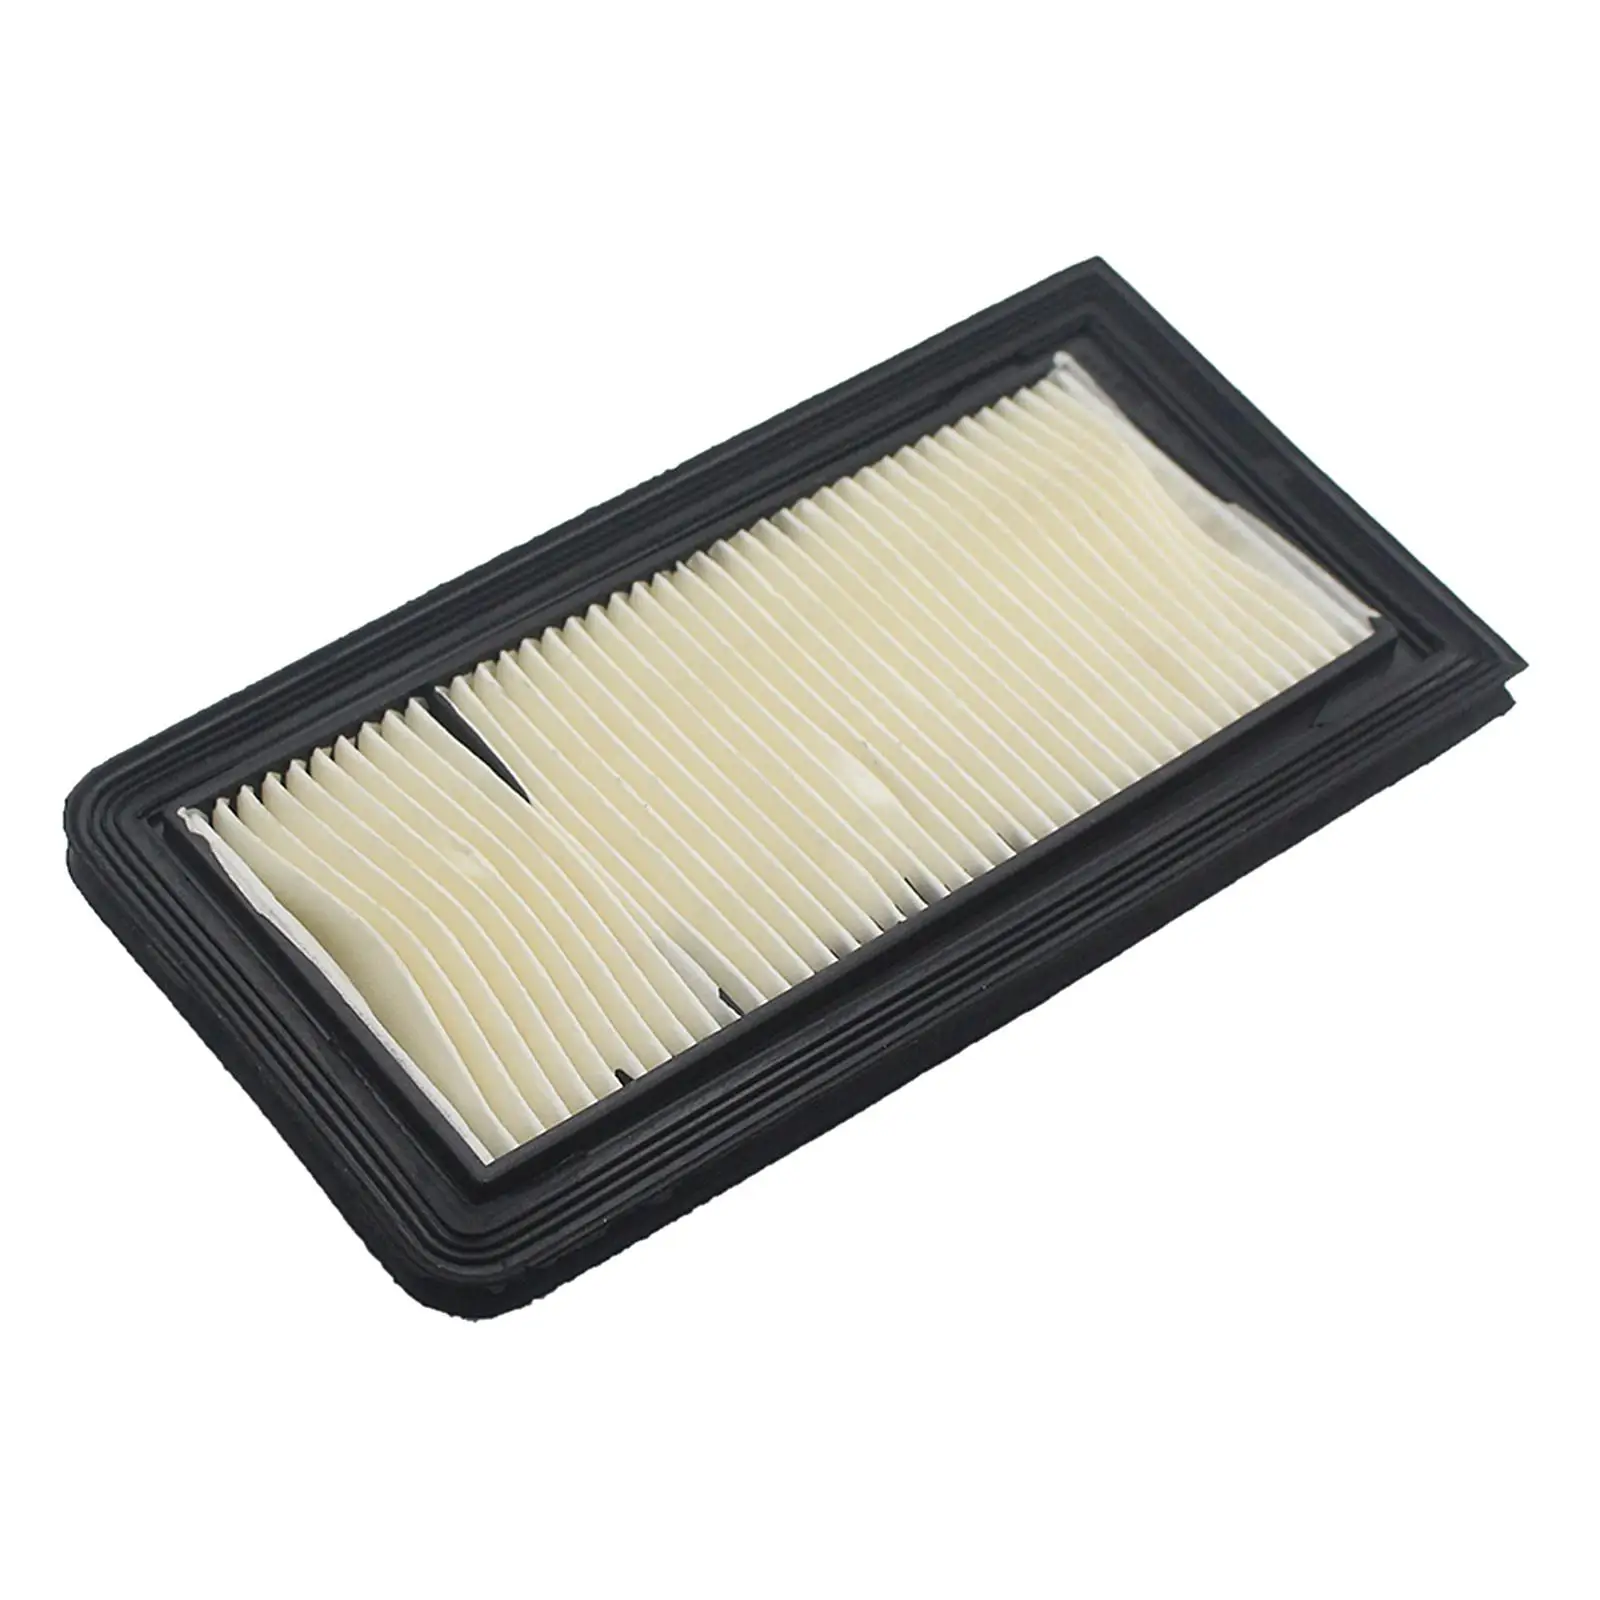  Intake Air Filter Cleaner  Fit for  AN650 SKYWAVE  650 Sky 50  650